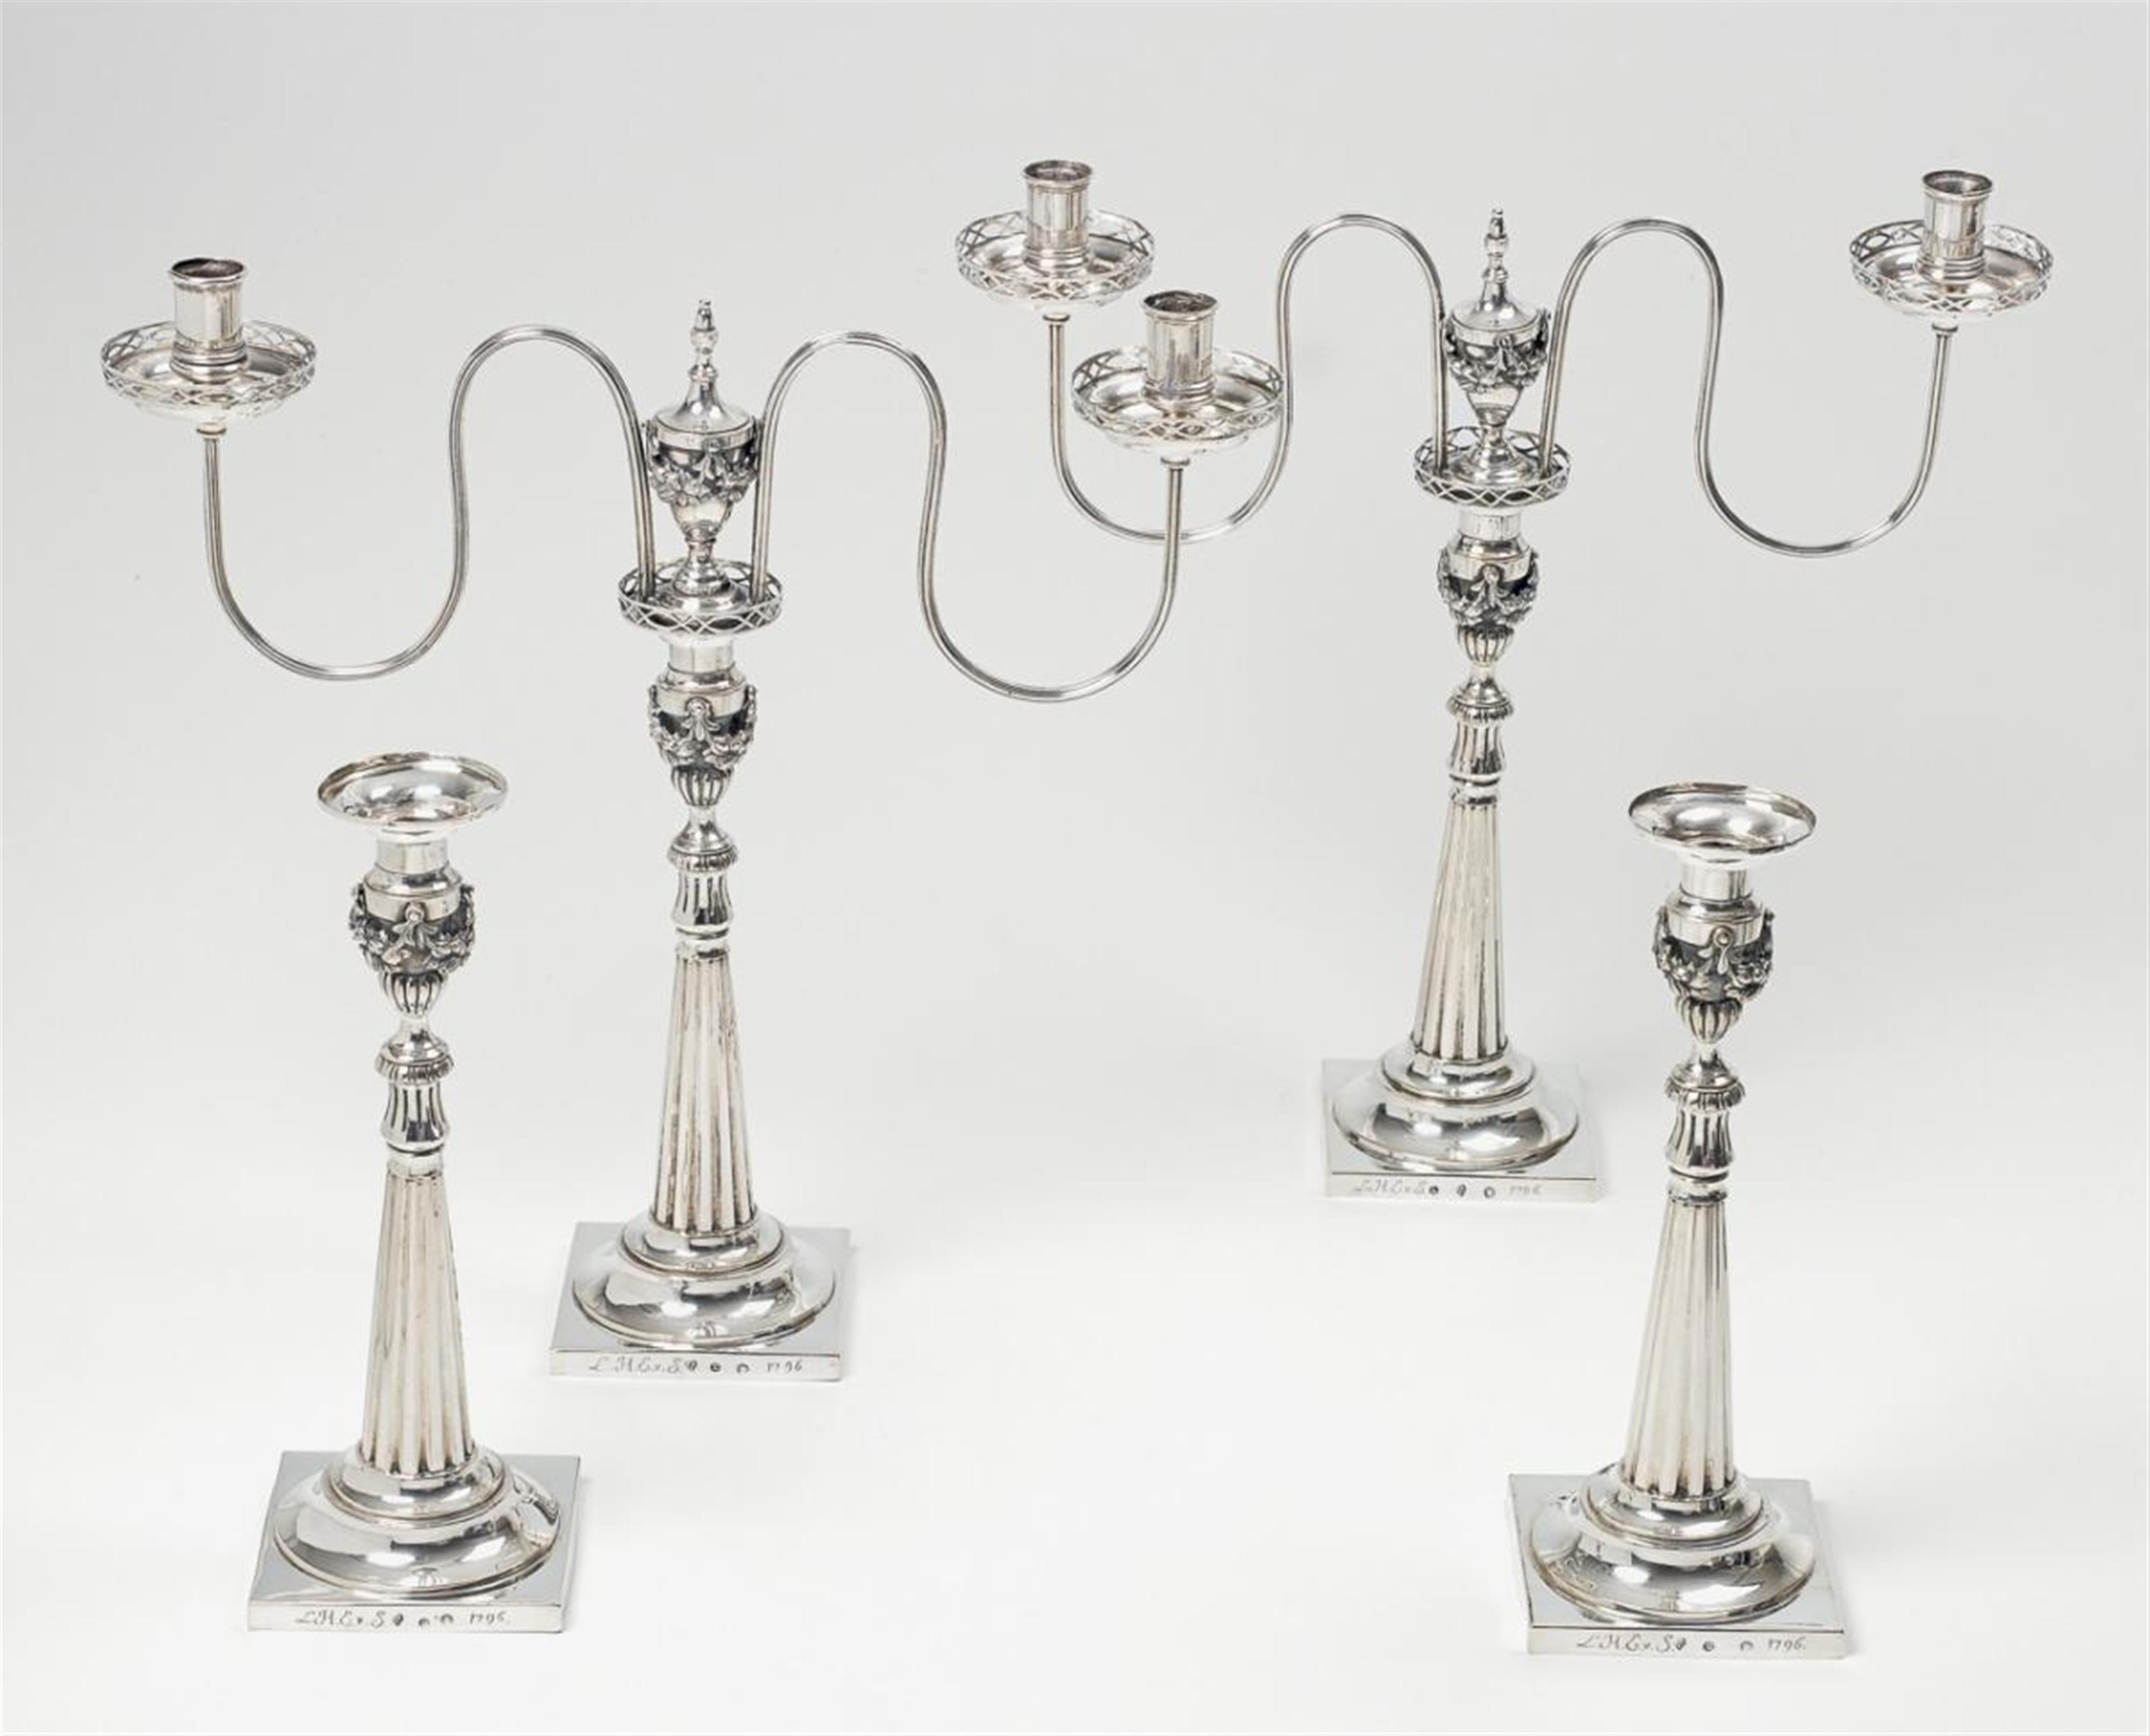 A pair of Breslau silver girandoles and a pair of candlesticks, monogrammed "L.H.E.v.S.". Marks of Christian Gottlieb Schneider, 1796. - image-1